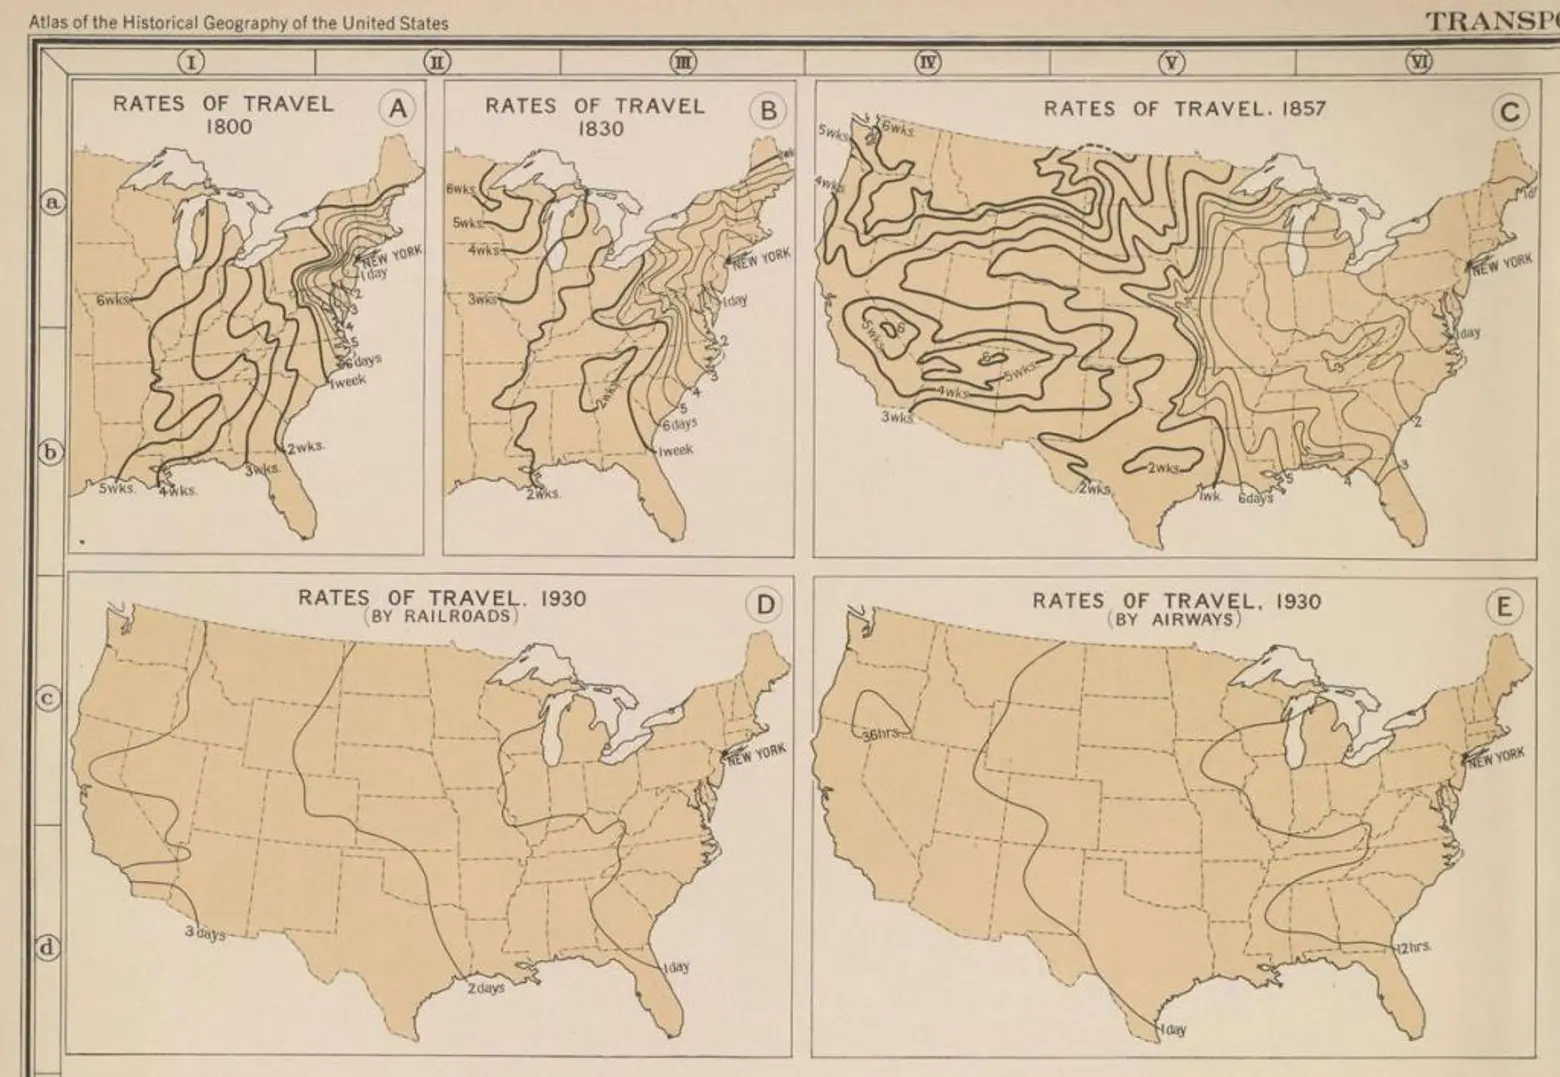 NYC travel map, Quartz, Atlas of the Historical Geography of the United States